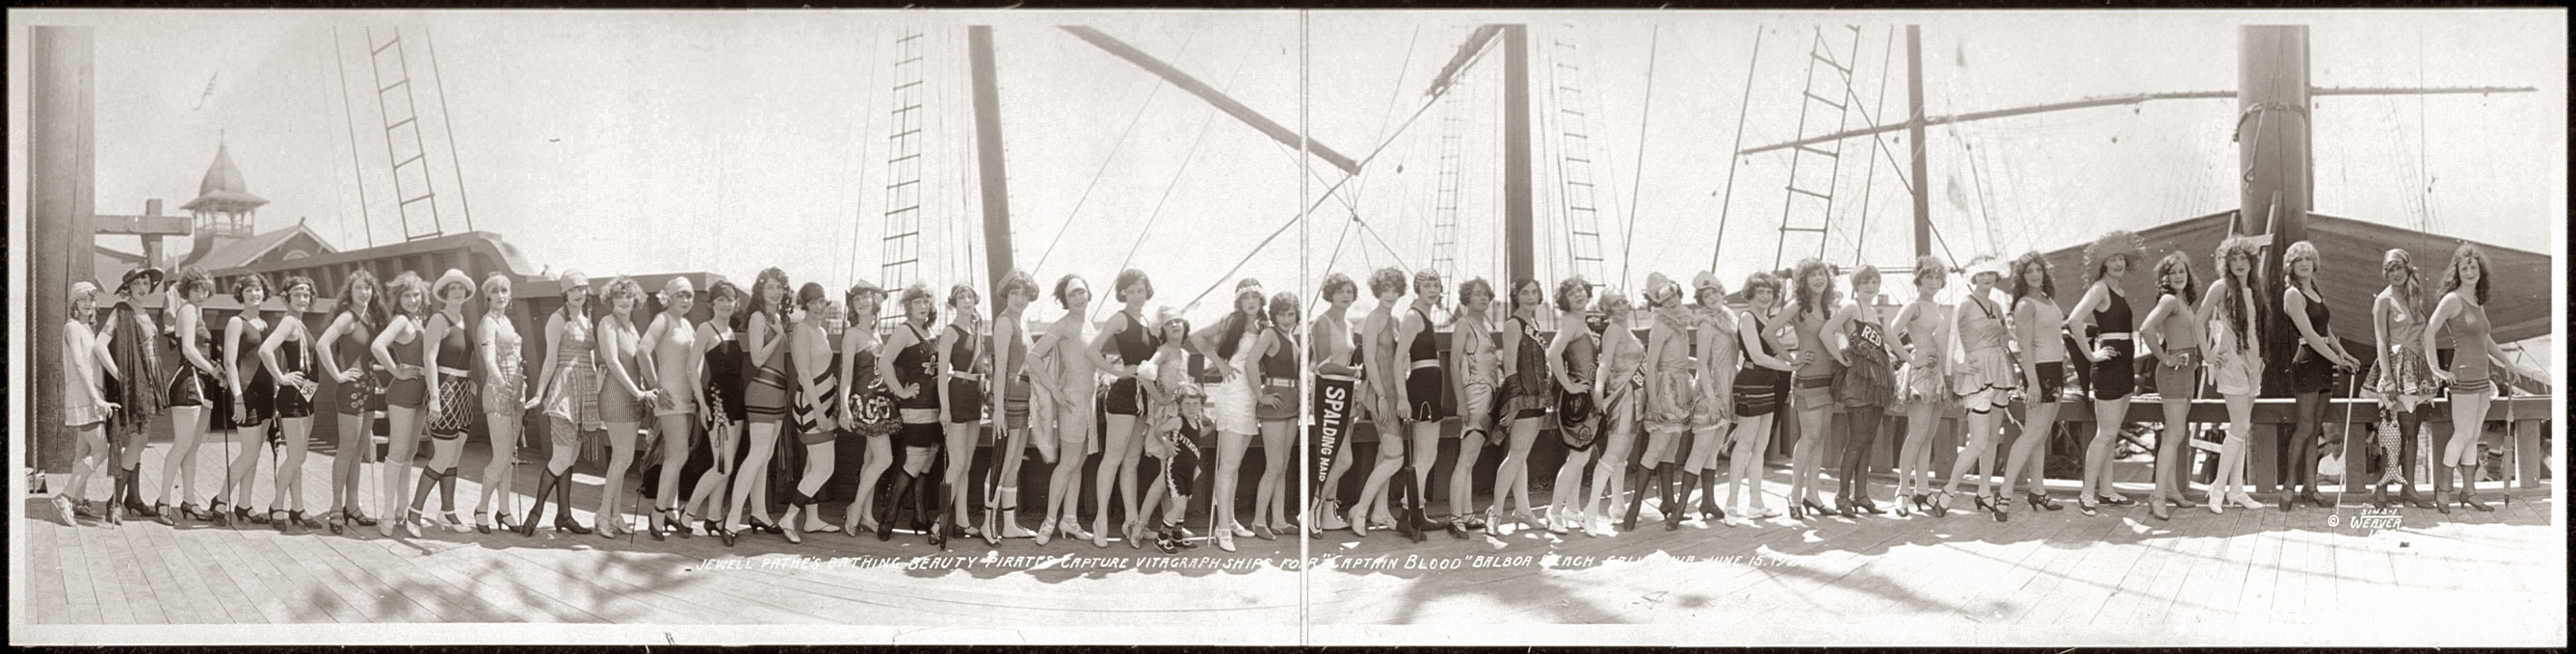 Jewell Pathe's Bathing Beauty Pirates capture Vitagraph Ships for "Captain Blood" in Balboa Beach, California, June 15, 1924. Photograph by M.F. Weaver. View full size